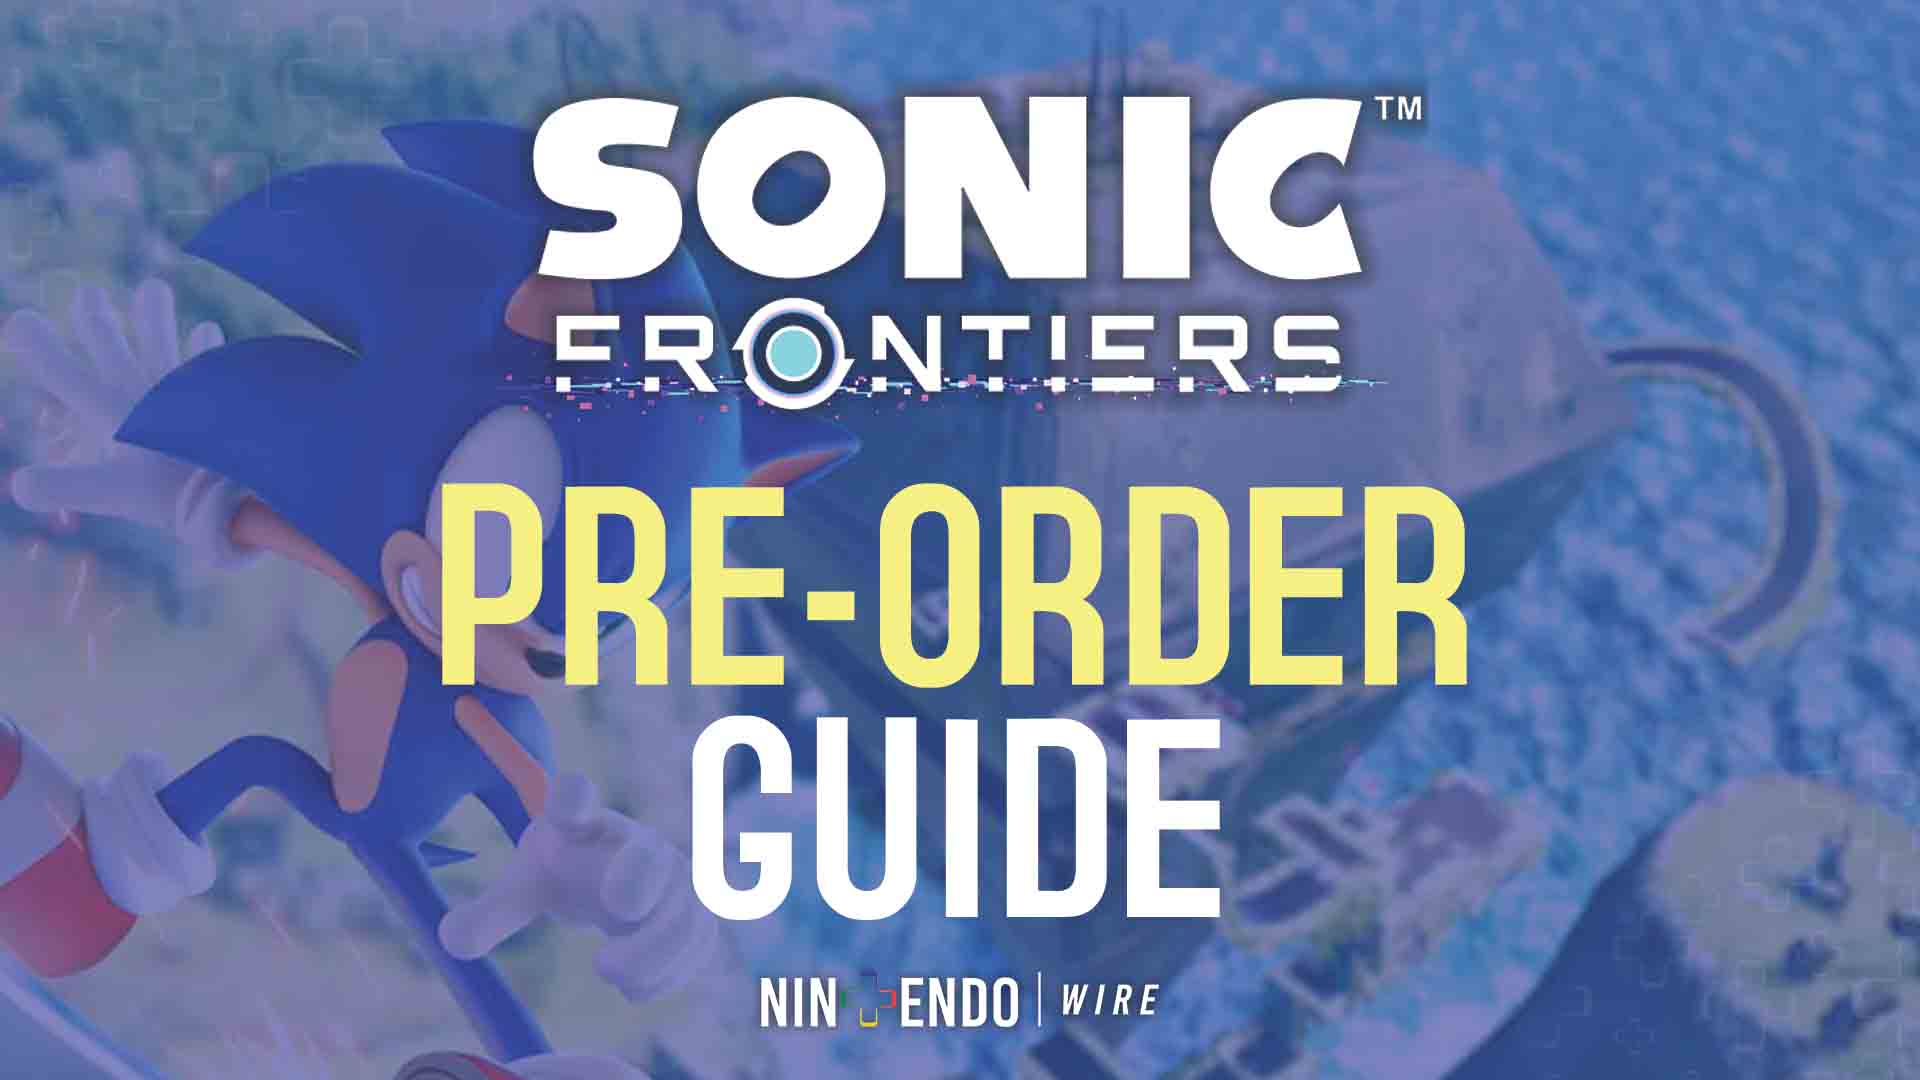 Sonic frontiers RPG Mobile game available to preorder : r/SonicFrontiers